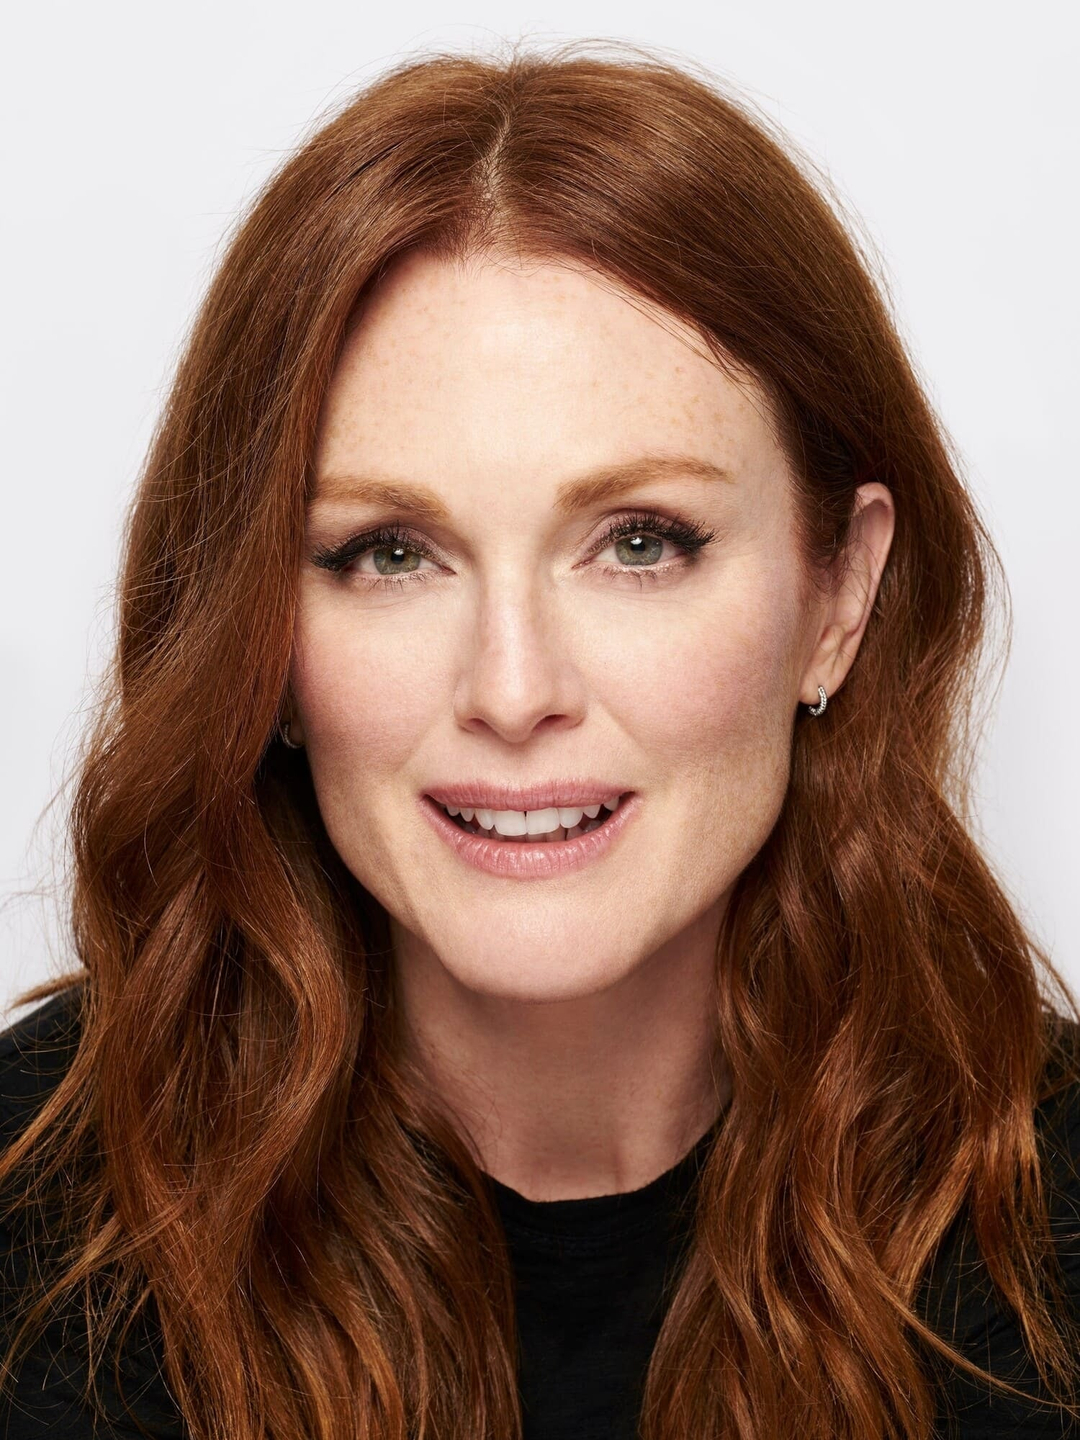 Julianne Moore how did she became famous